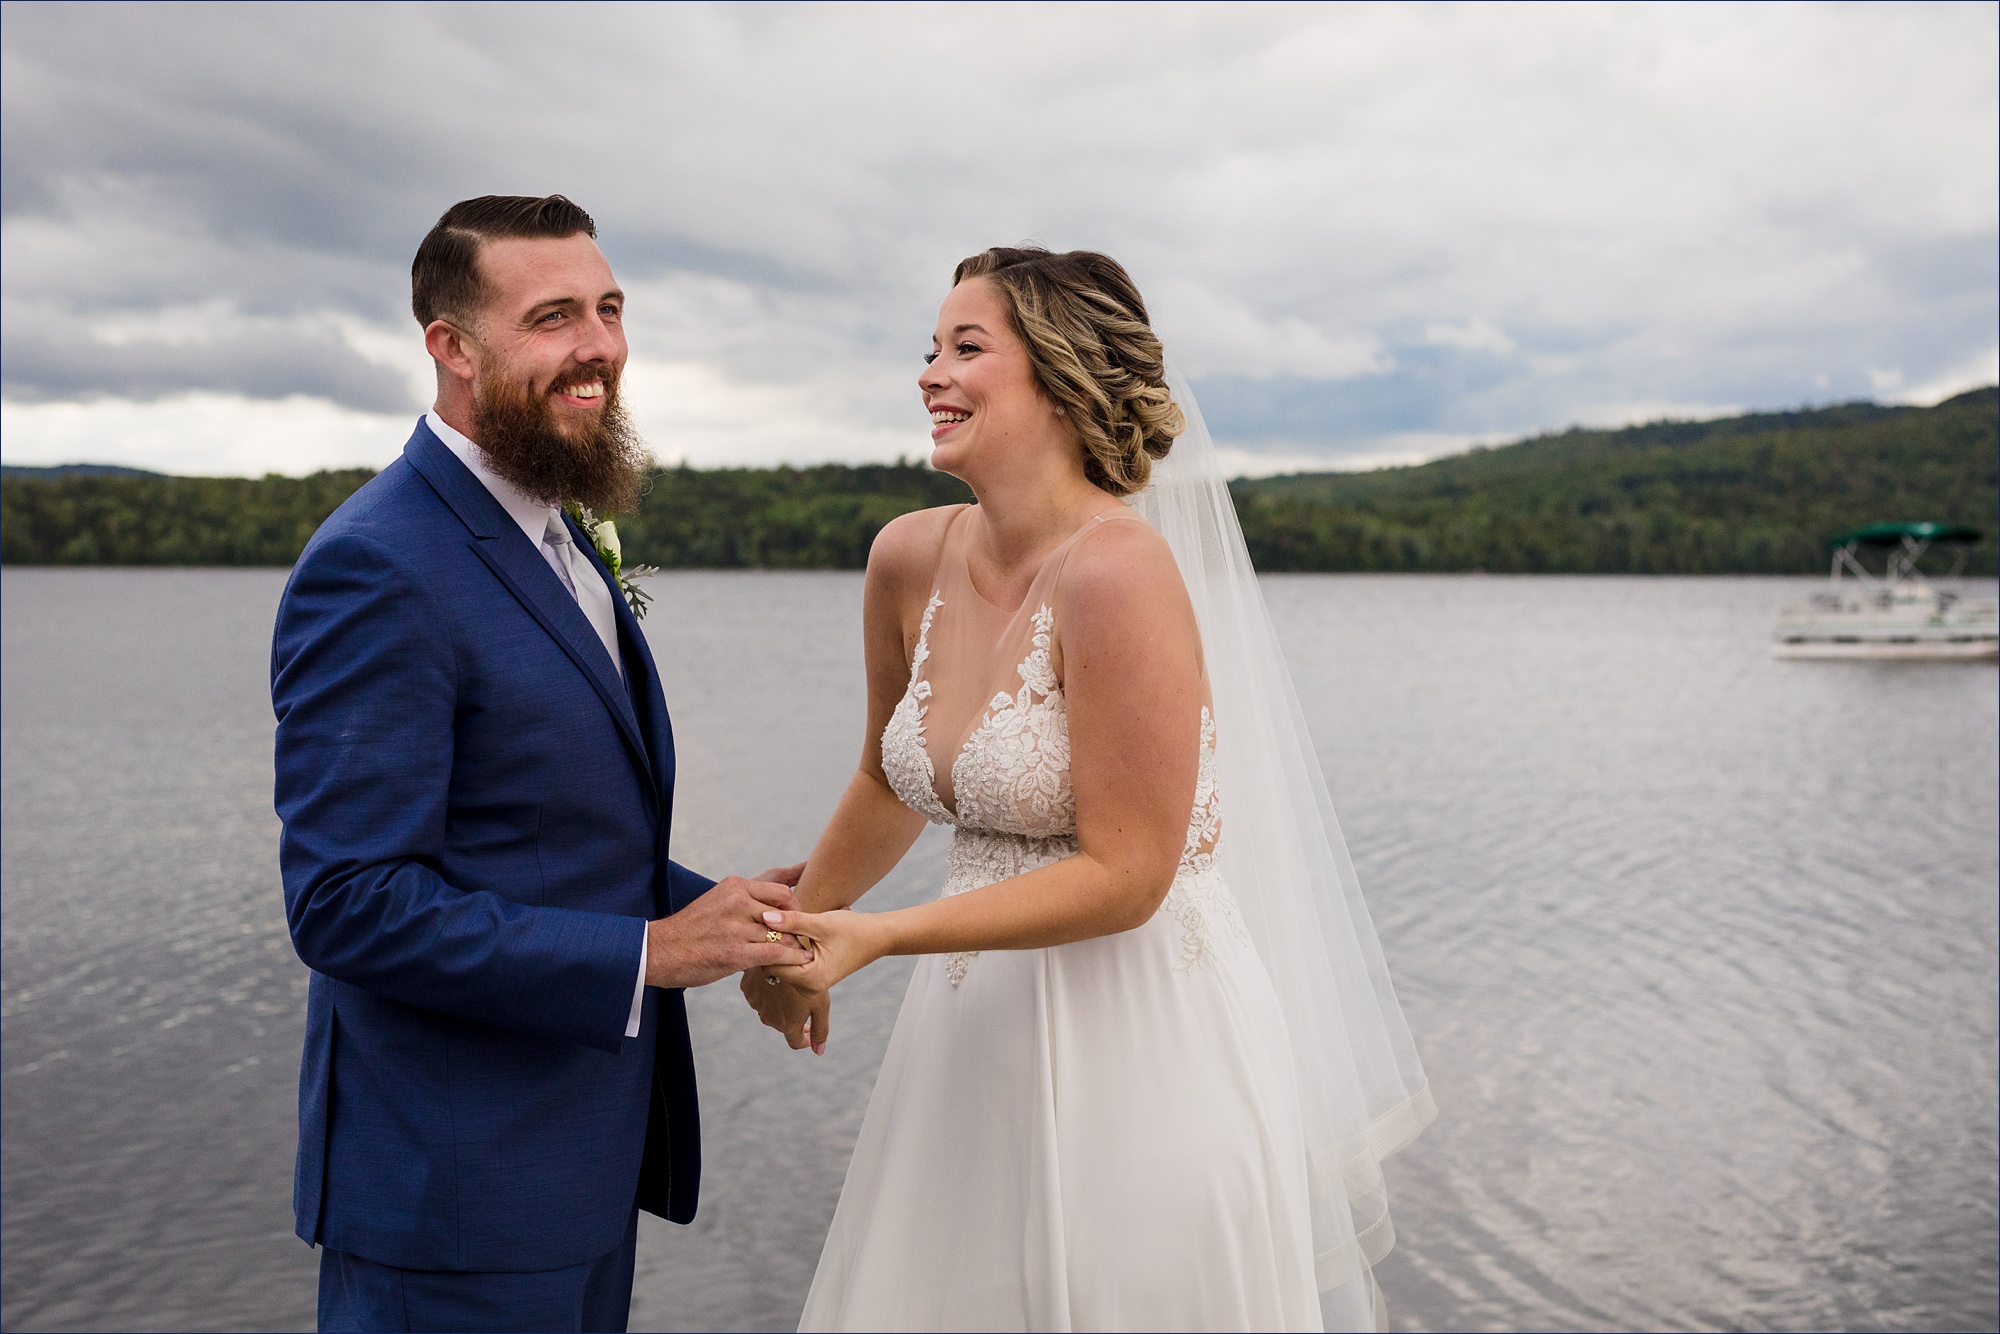 The bride and groom laugh as they hold onto one another after their Maine wedding out on a lake